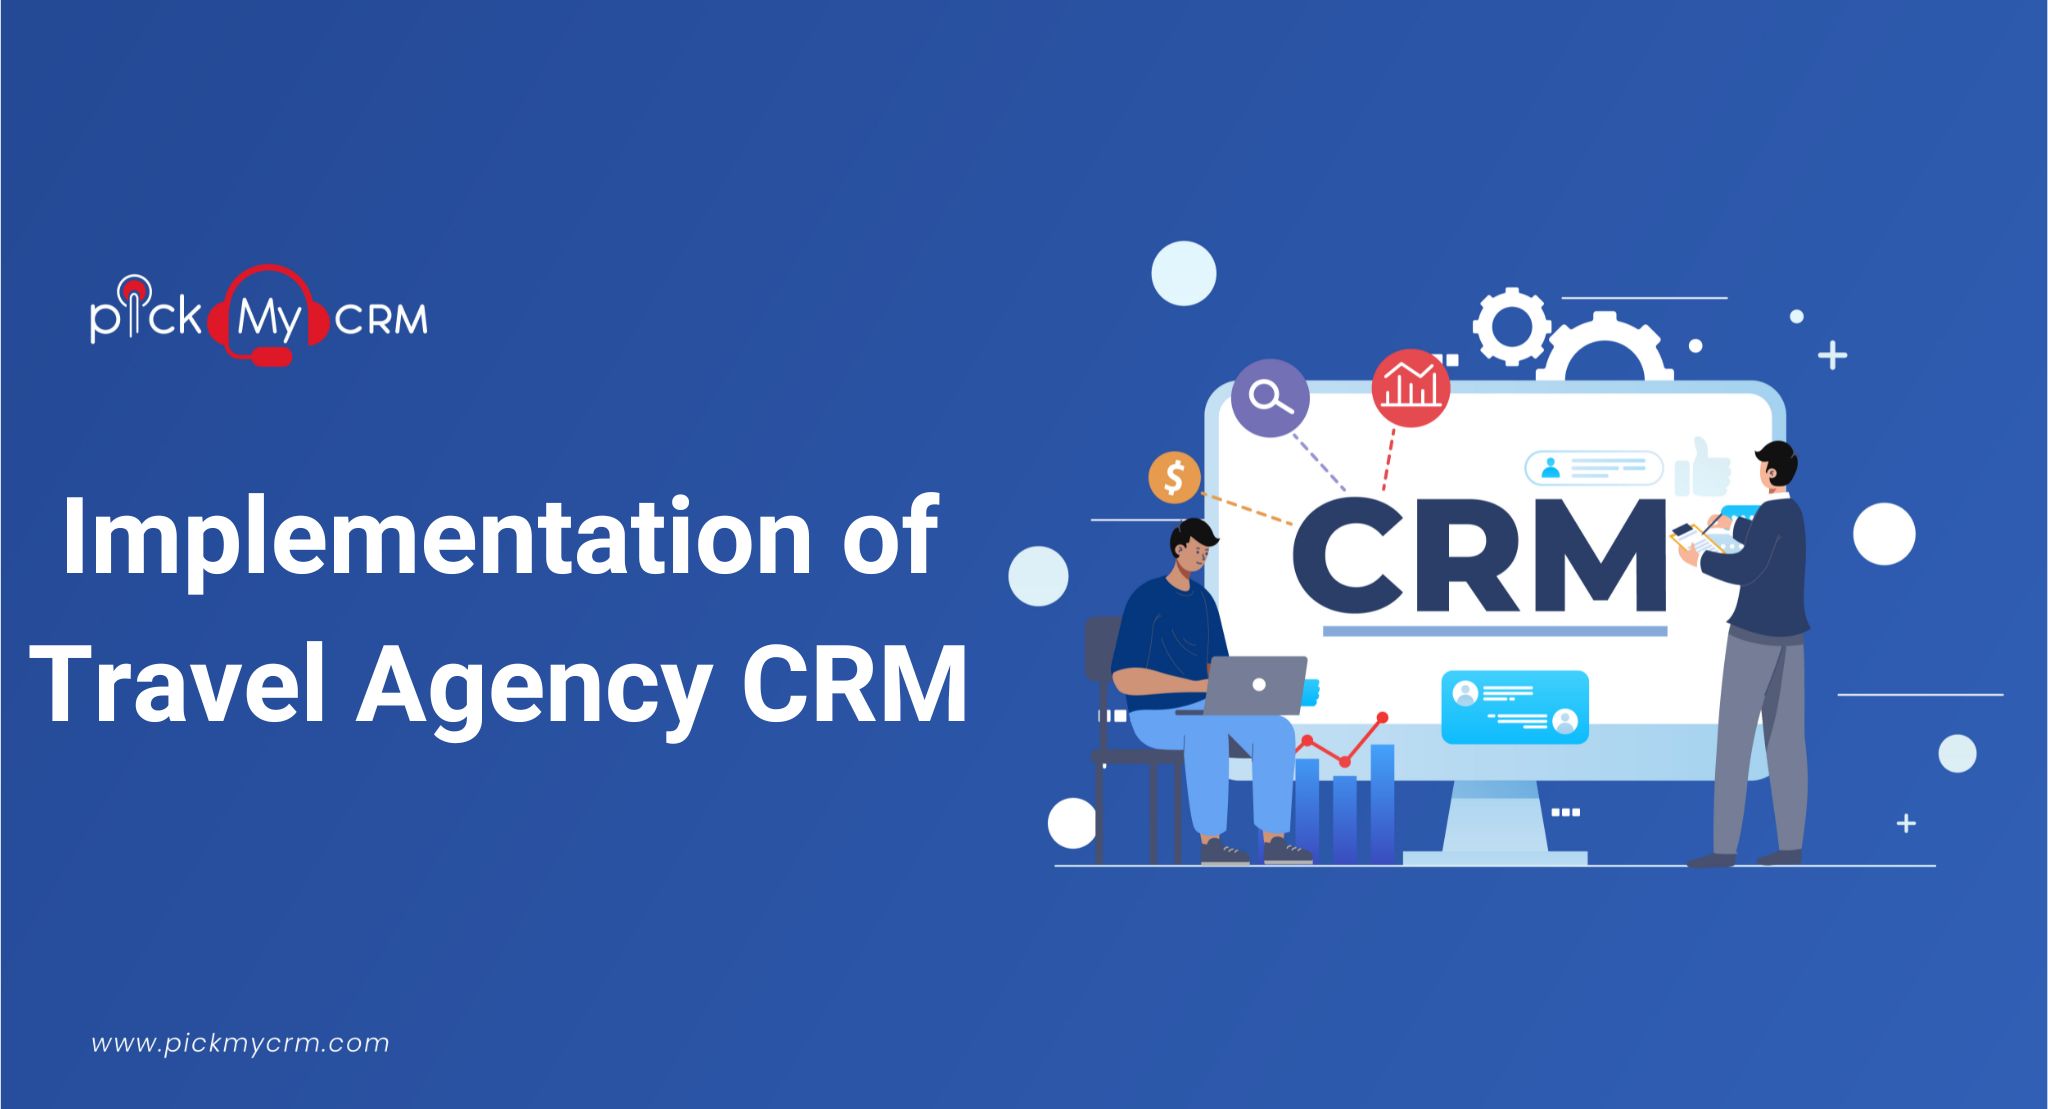 Implementation of Travel Agency CRM